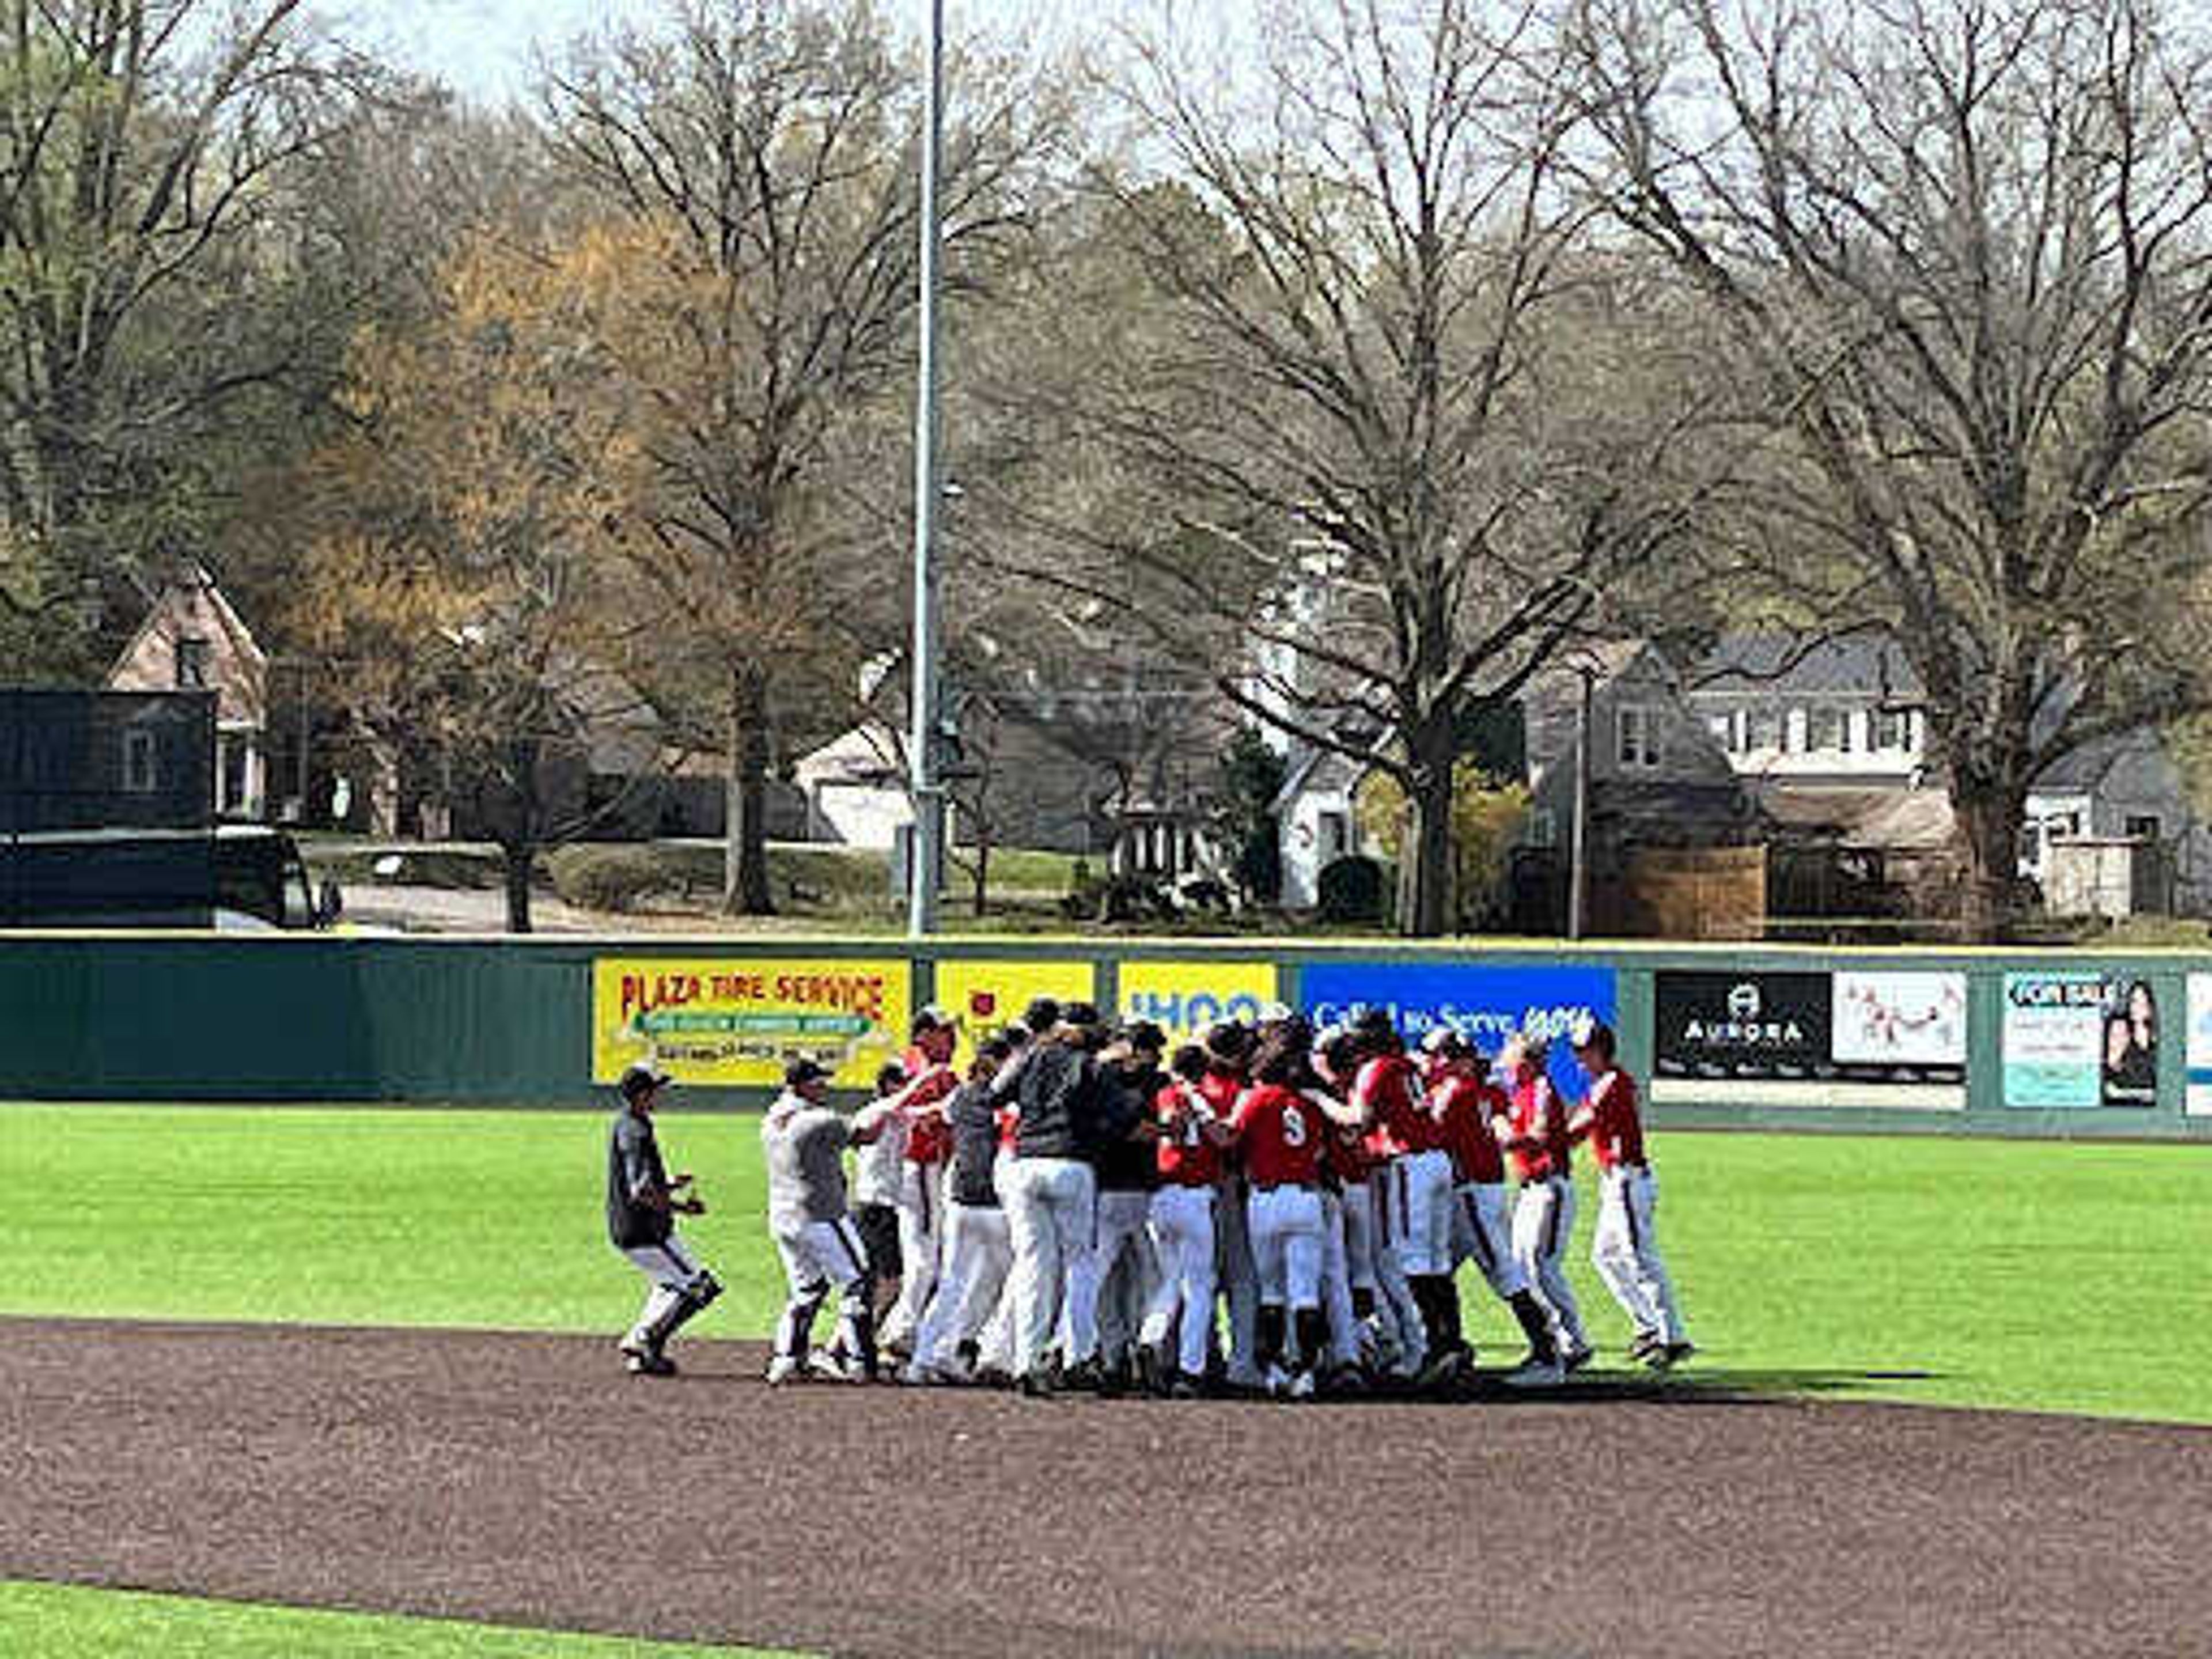 The Redhawks celebrate on the field after a two run ninth inning gives them a walk off victory against Murray State on April 10.